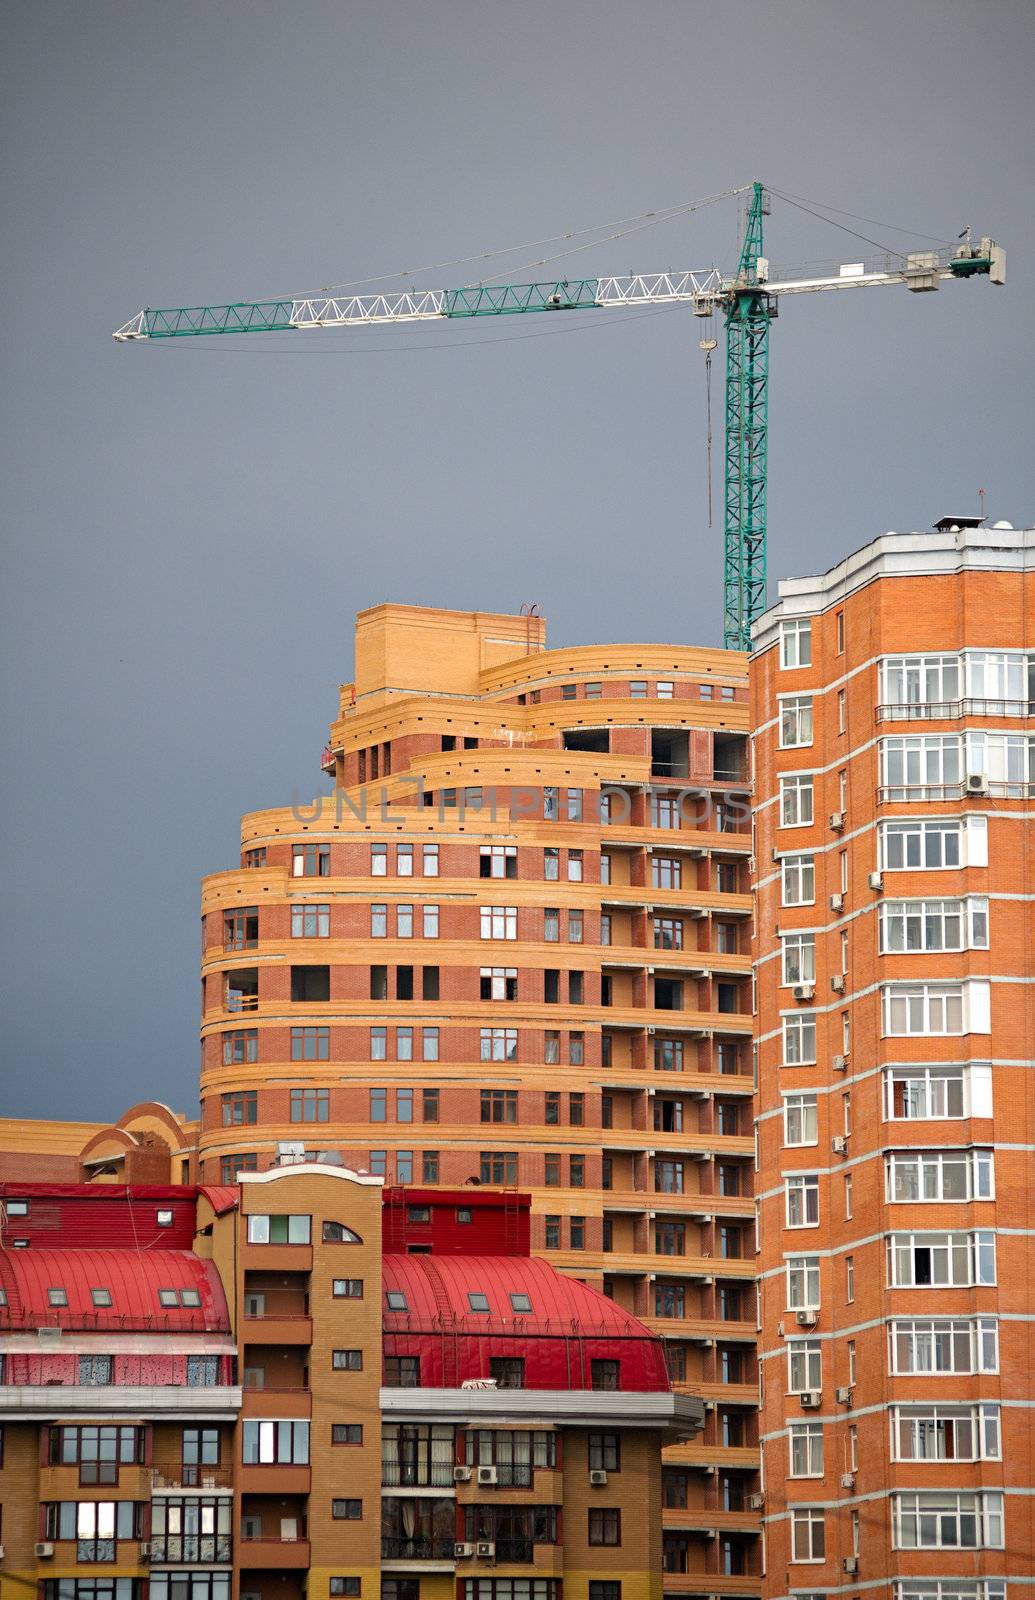 Architectural abstract of modern multi apartments building and hoisting crane in a sunset (recent development)